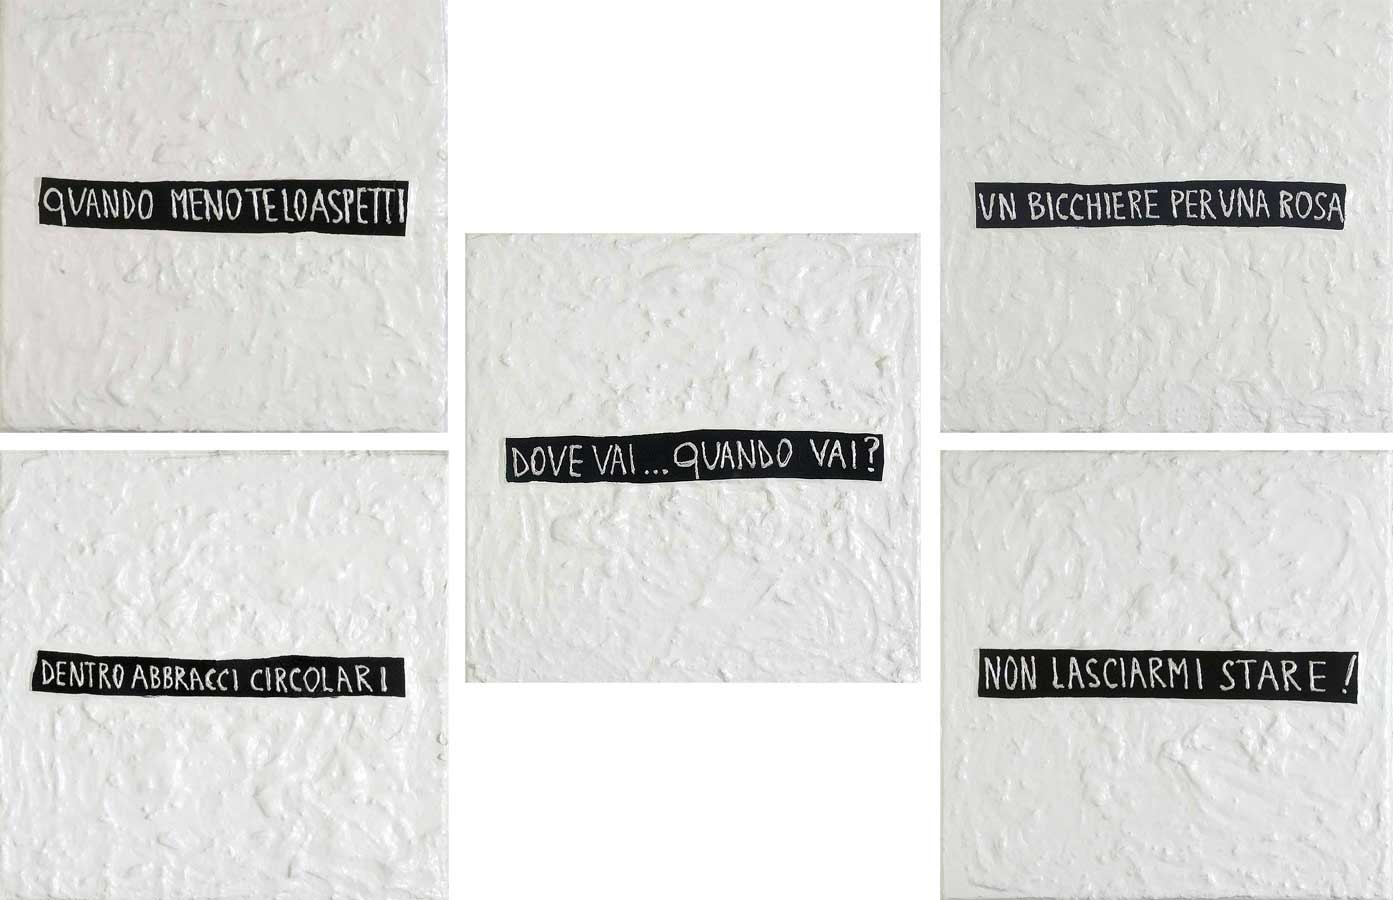 Poesie bianche in 5, painting by Nicola Guerraz, acrylic and vulcanized rubber on canvas, 160 x 160 cm, 2008, total